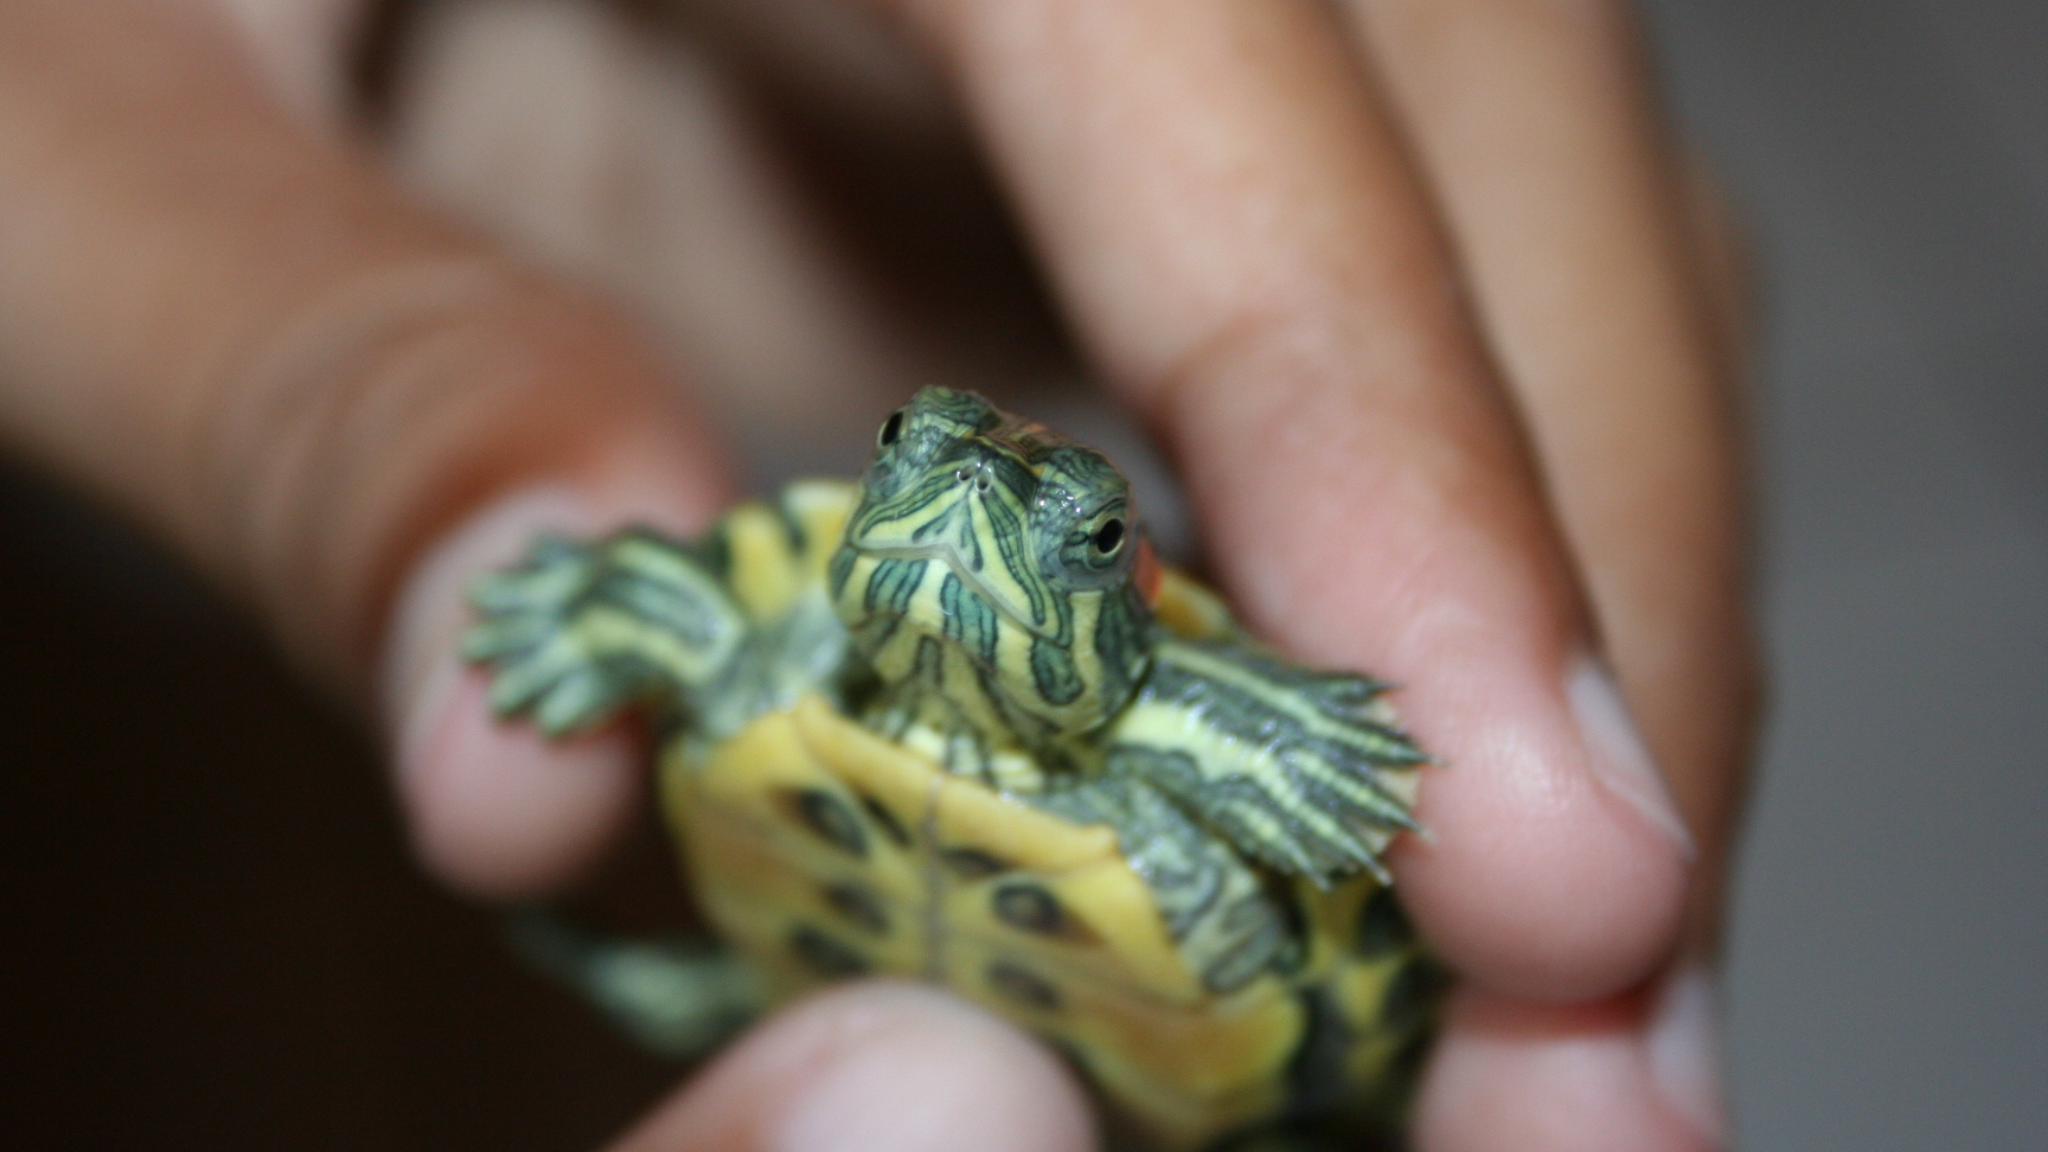 Up close photo of hand holding a red-eared slider turtle under 4 inches in length